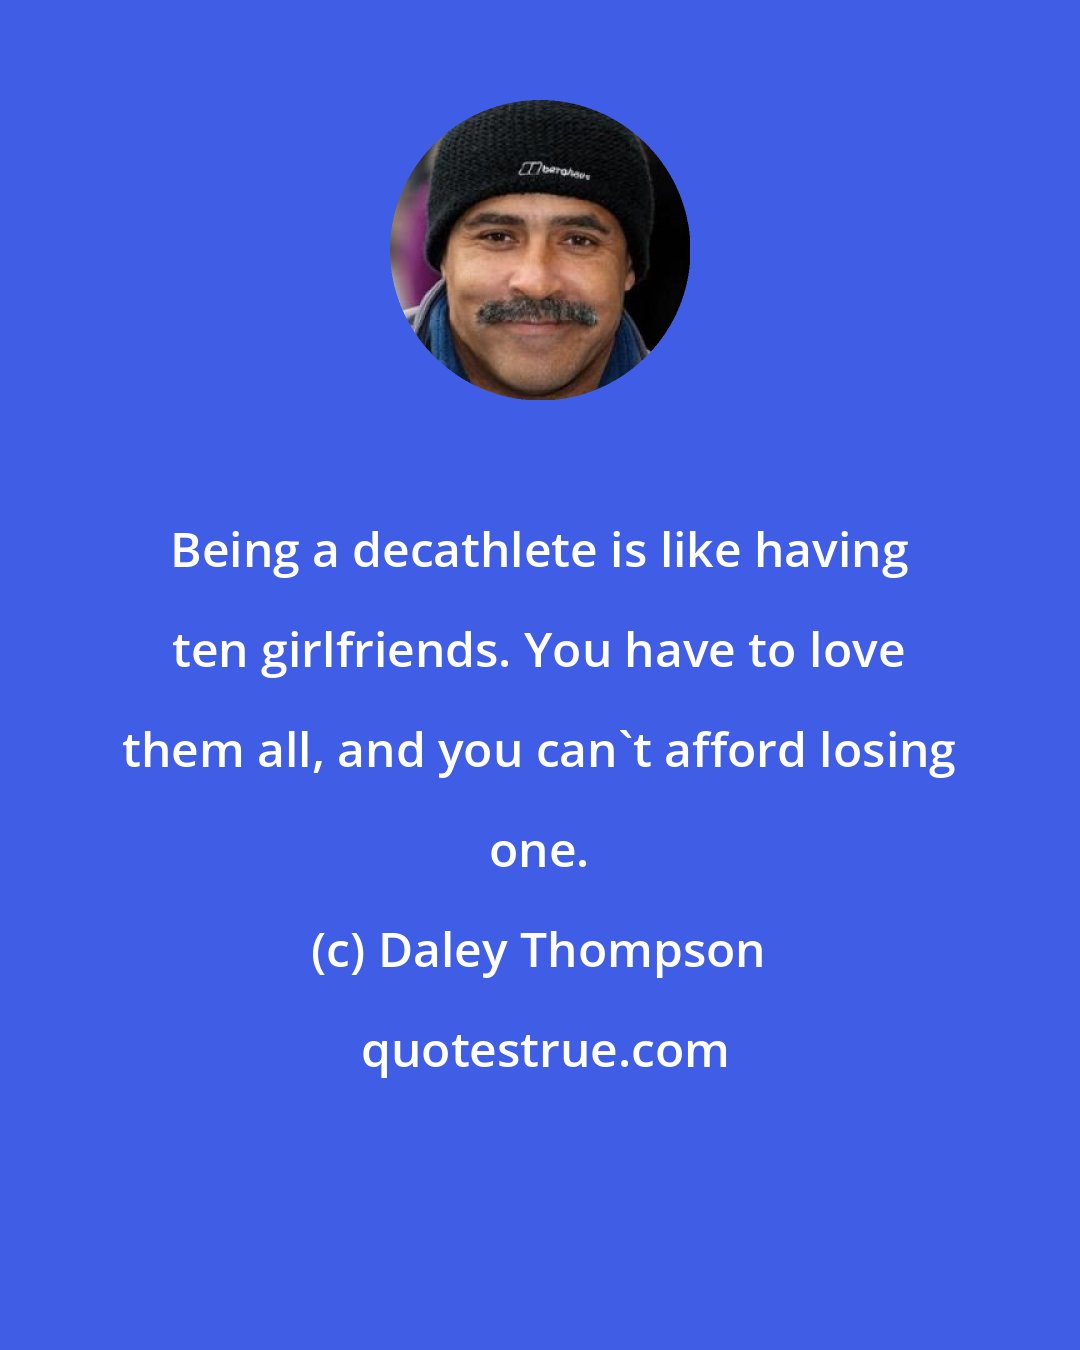 Daley Thompson: Being a decathlete is like having ten girlfriends. You have to love them all, and you can't afford losing one.